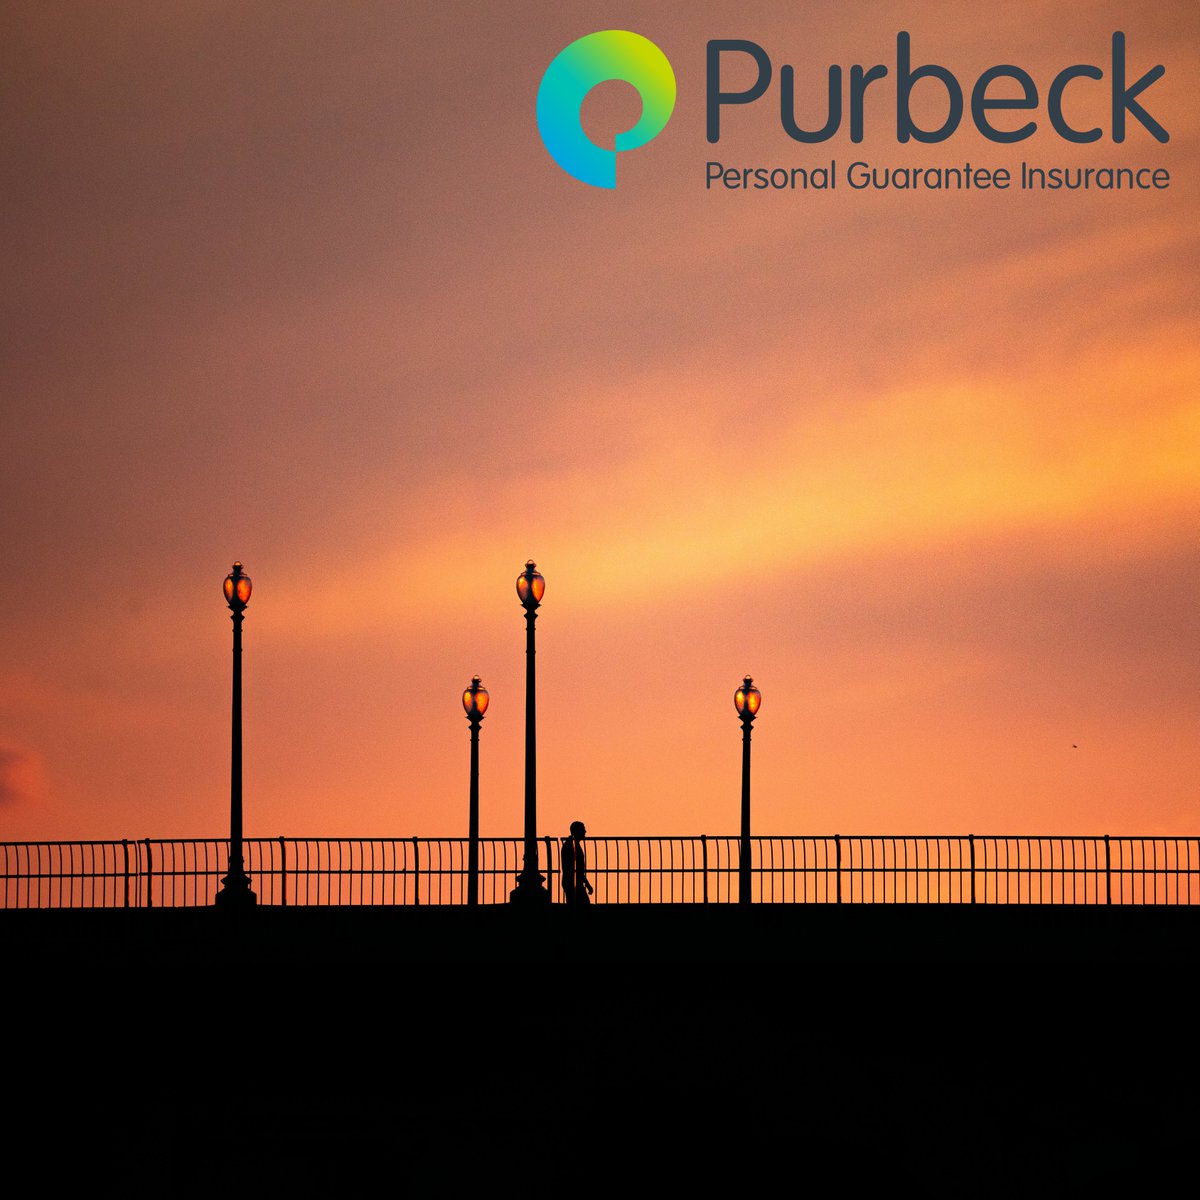 Visit Purbeck today to secure your personal guarantee with our unique insurance product.

purbeckinsurance.co.uk/?utm_source=X&…

#insurance #sme #uksme #smallbusiness #smallbusinessuk #startup #business #businessgrowth #entrepreneur #ukstartups #newbusiness